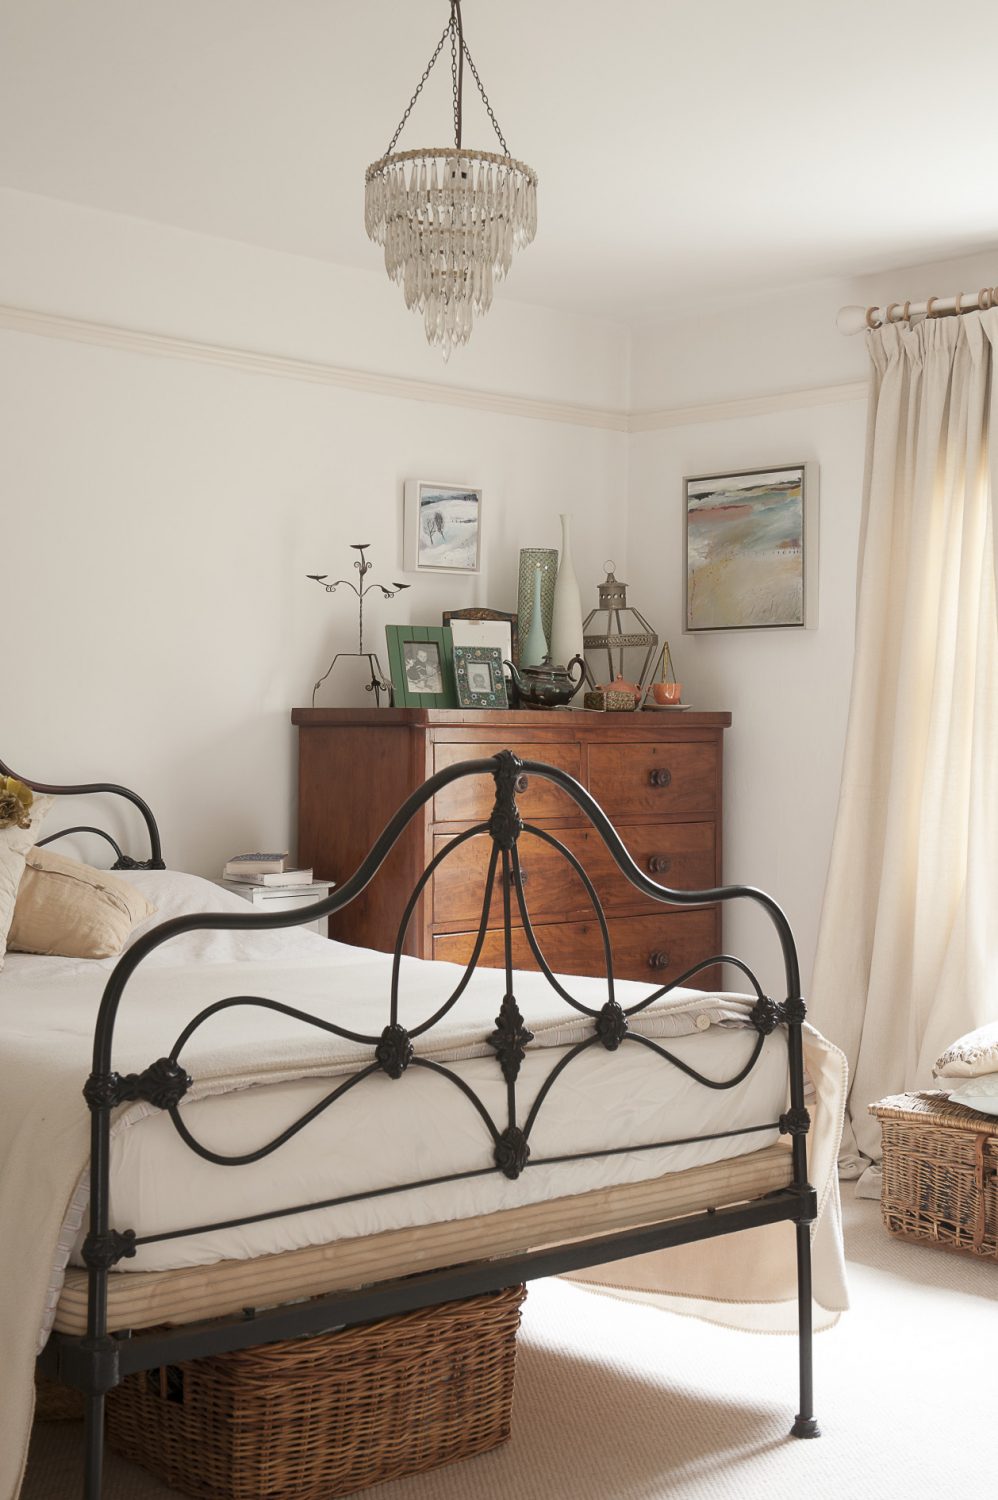 Upstairs the star of the show in the crisp, white master bedroom is a lovely period art nouveau wrought-iron bed